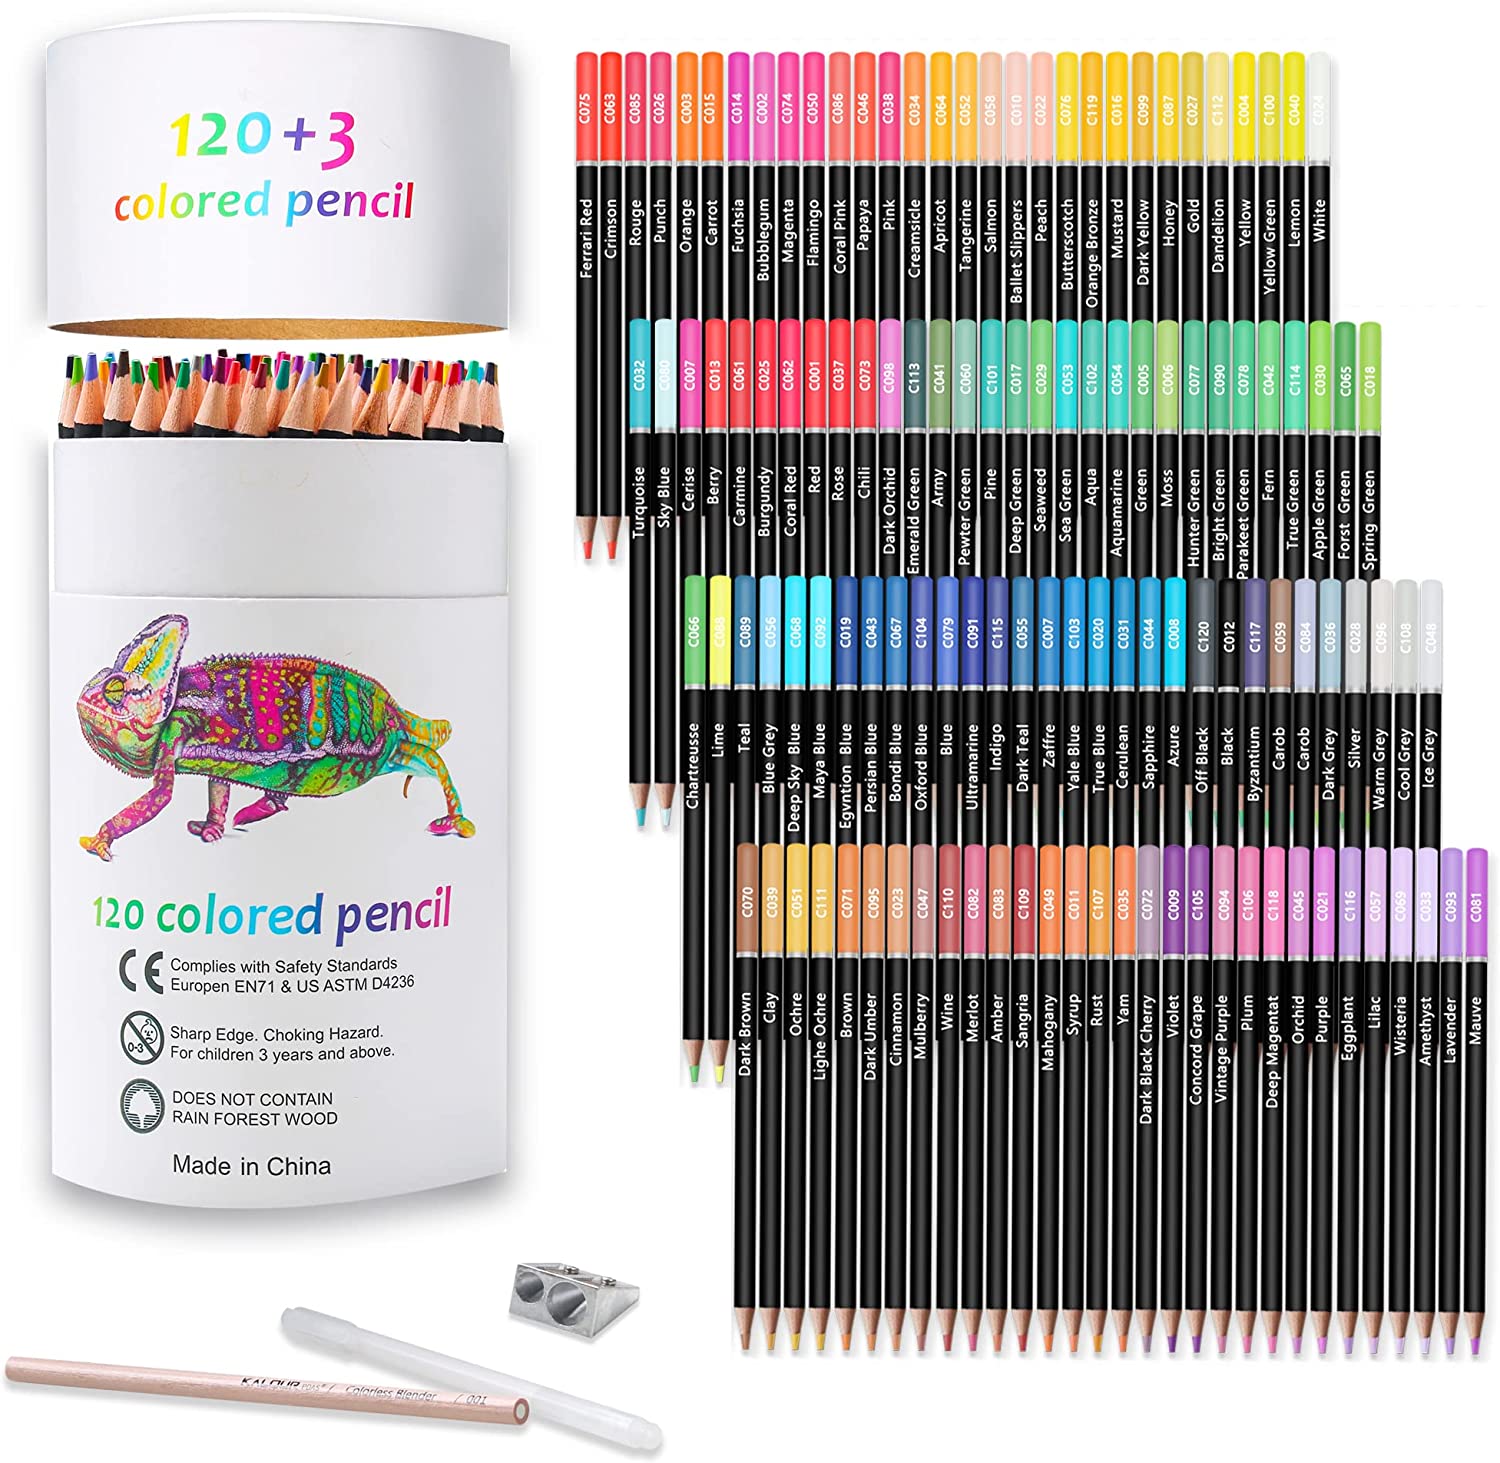 KALOUR Colored Pencils for Adult Coloring Book,Set of 72 Colors